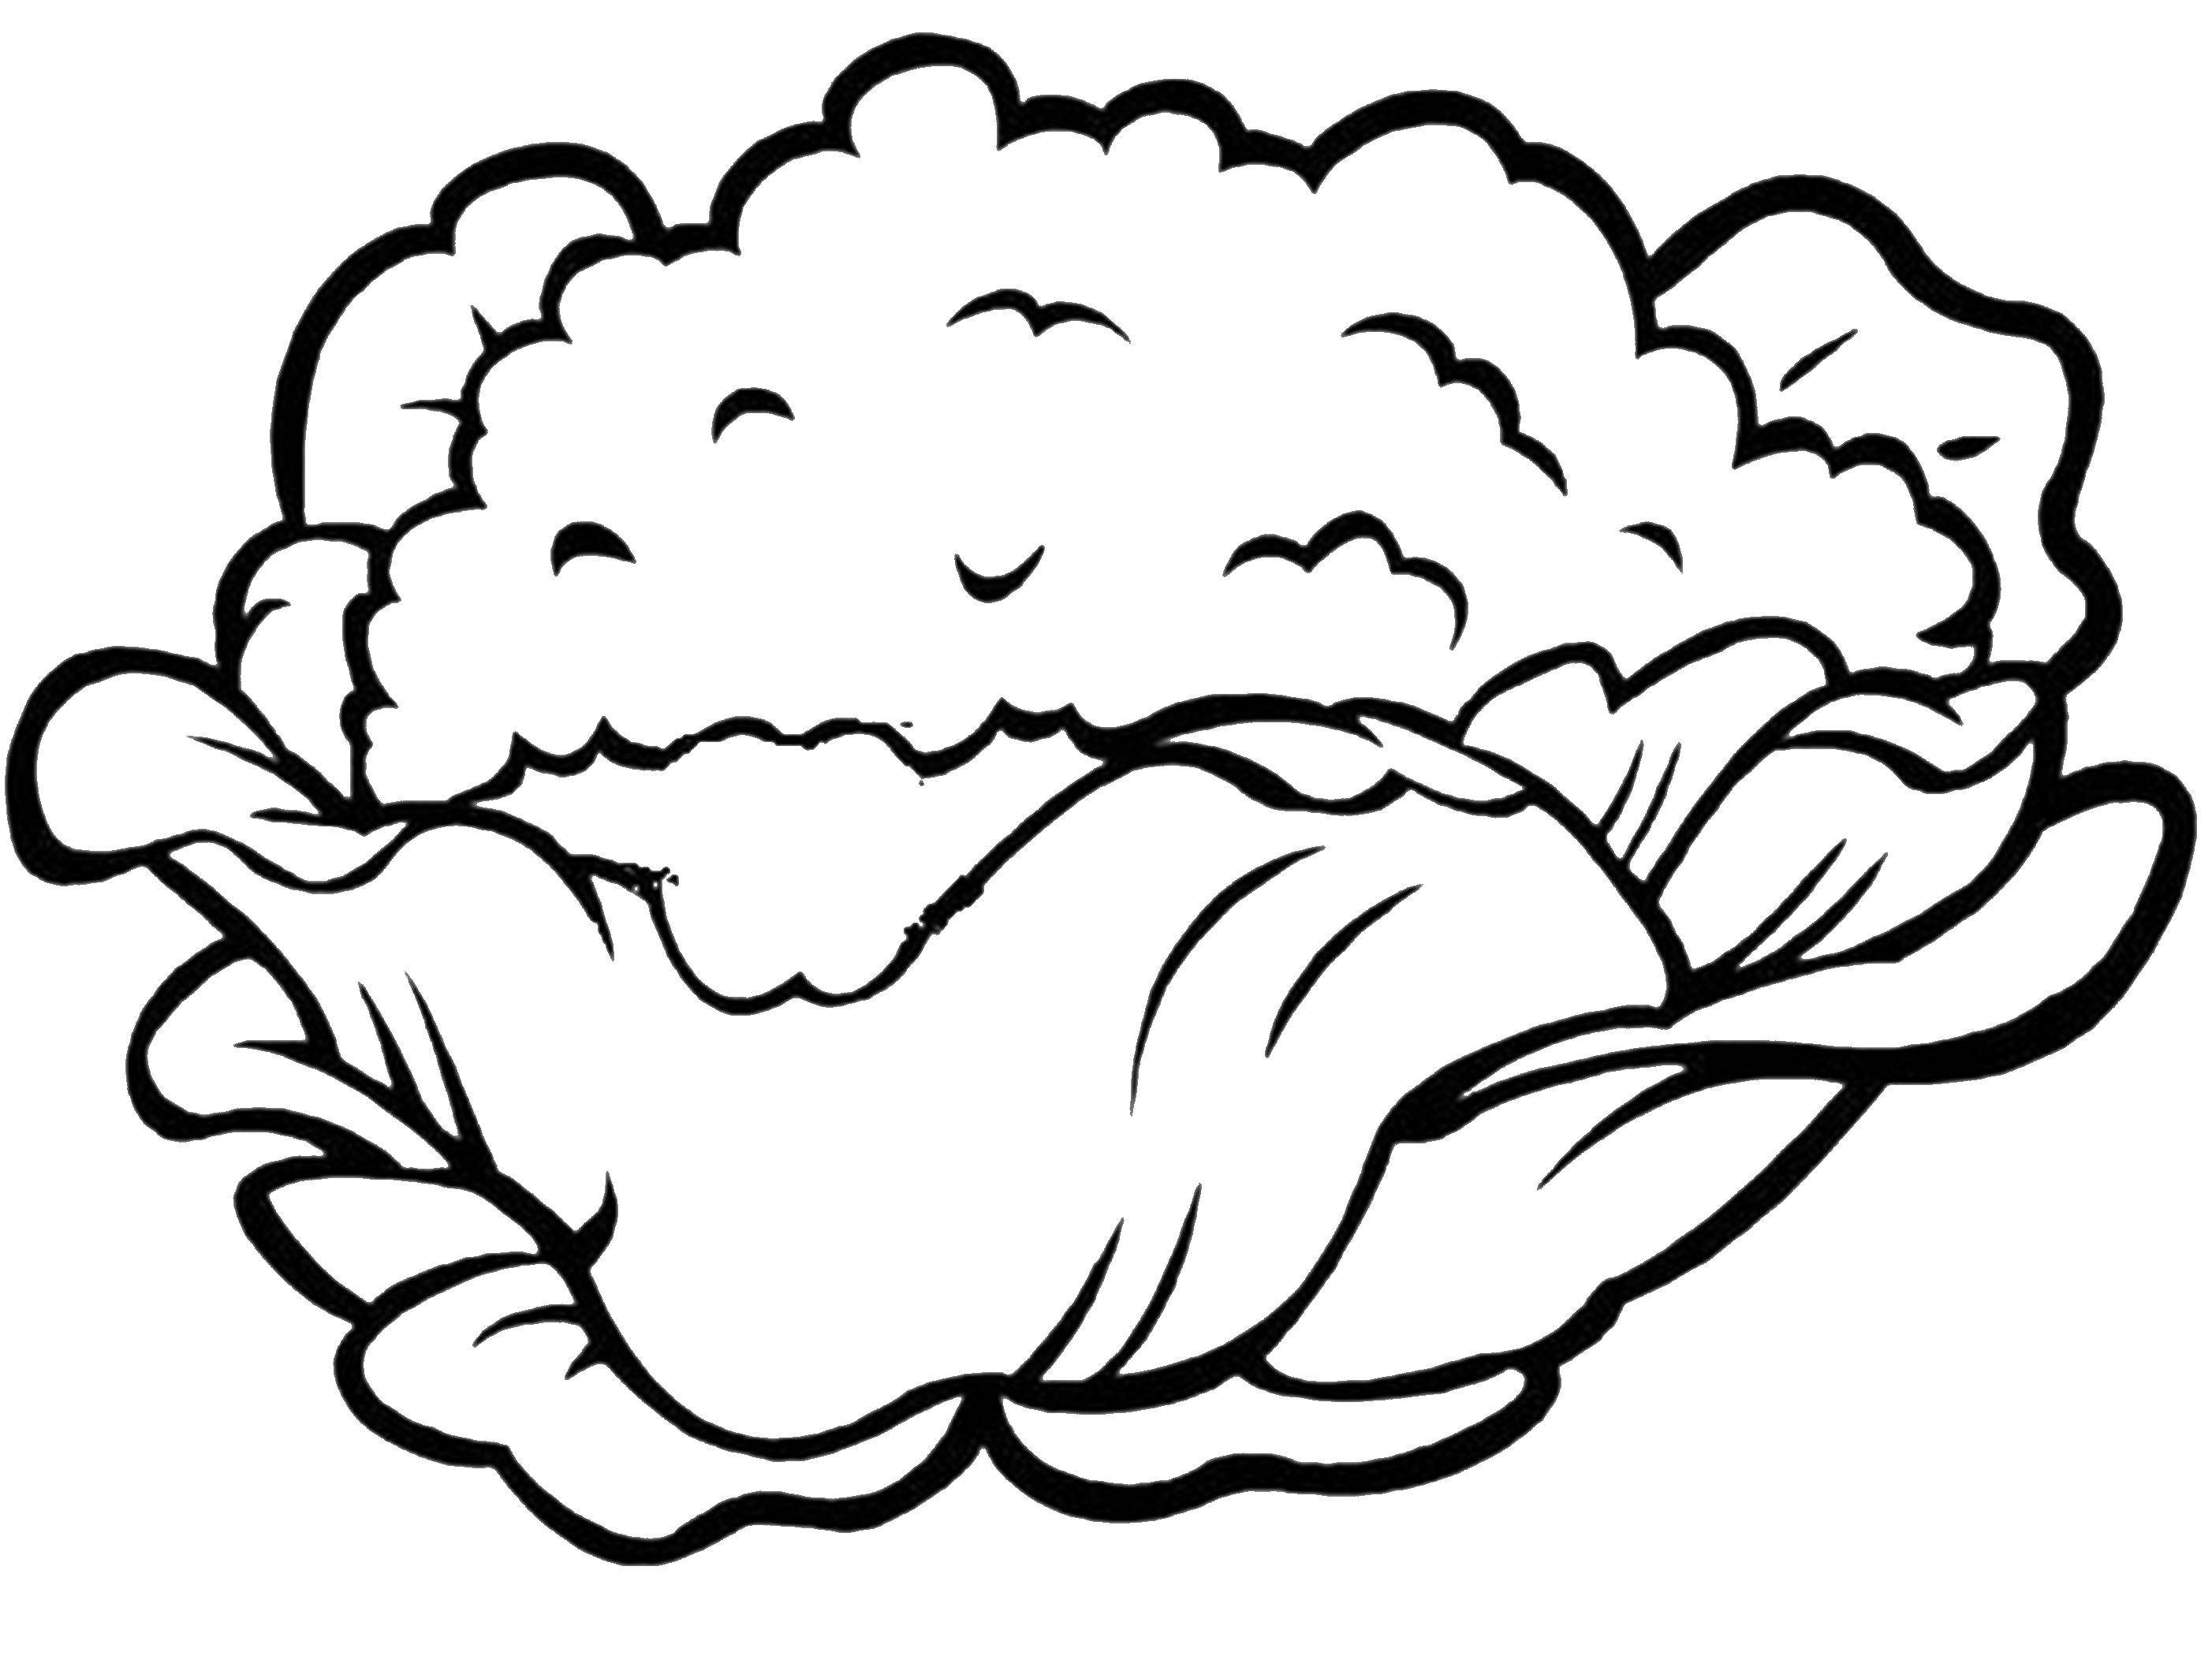 Coloring Cauliflower. Category vegetables. Tags:  cabbage.